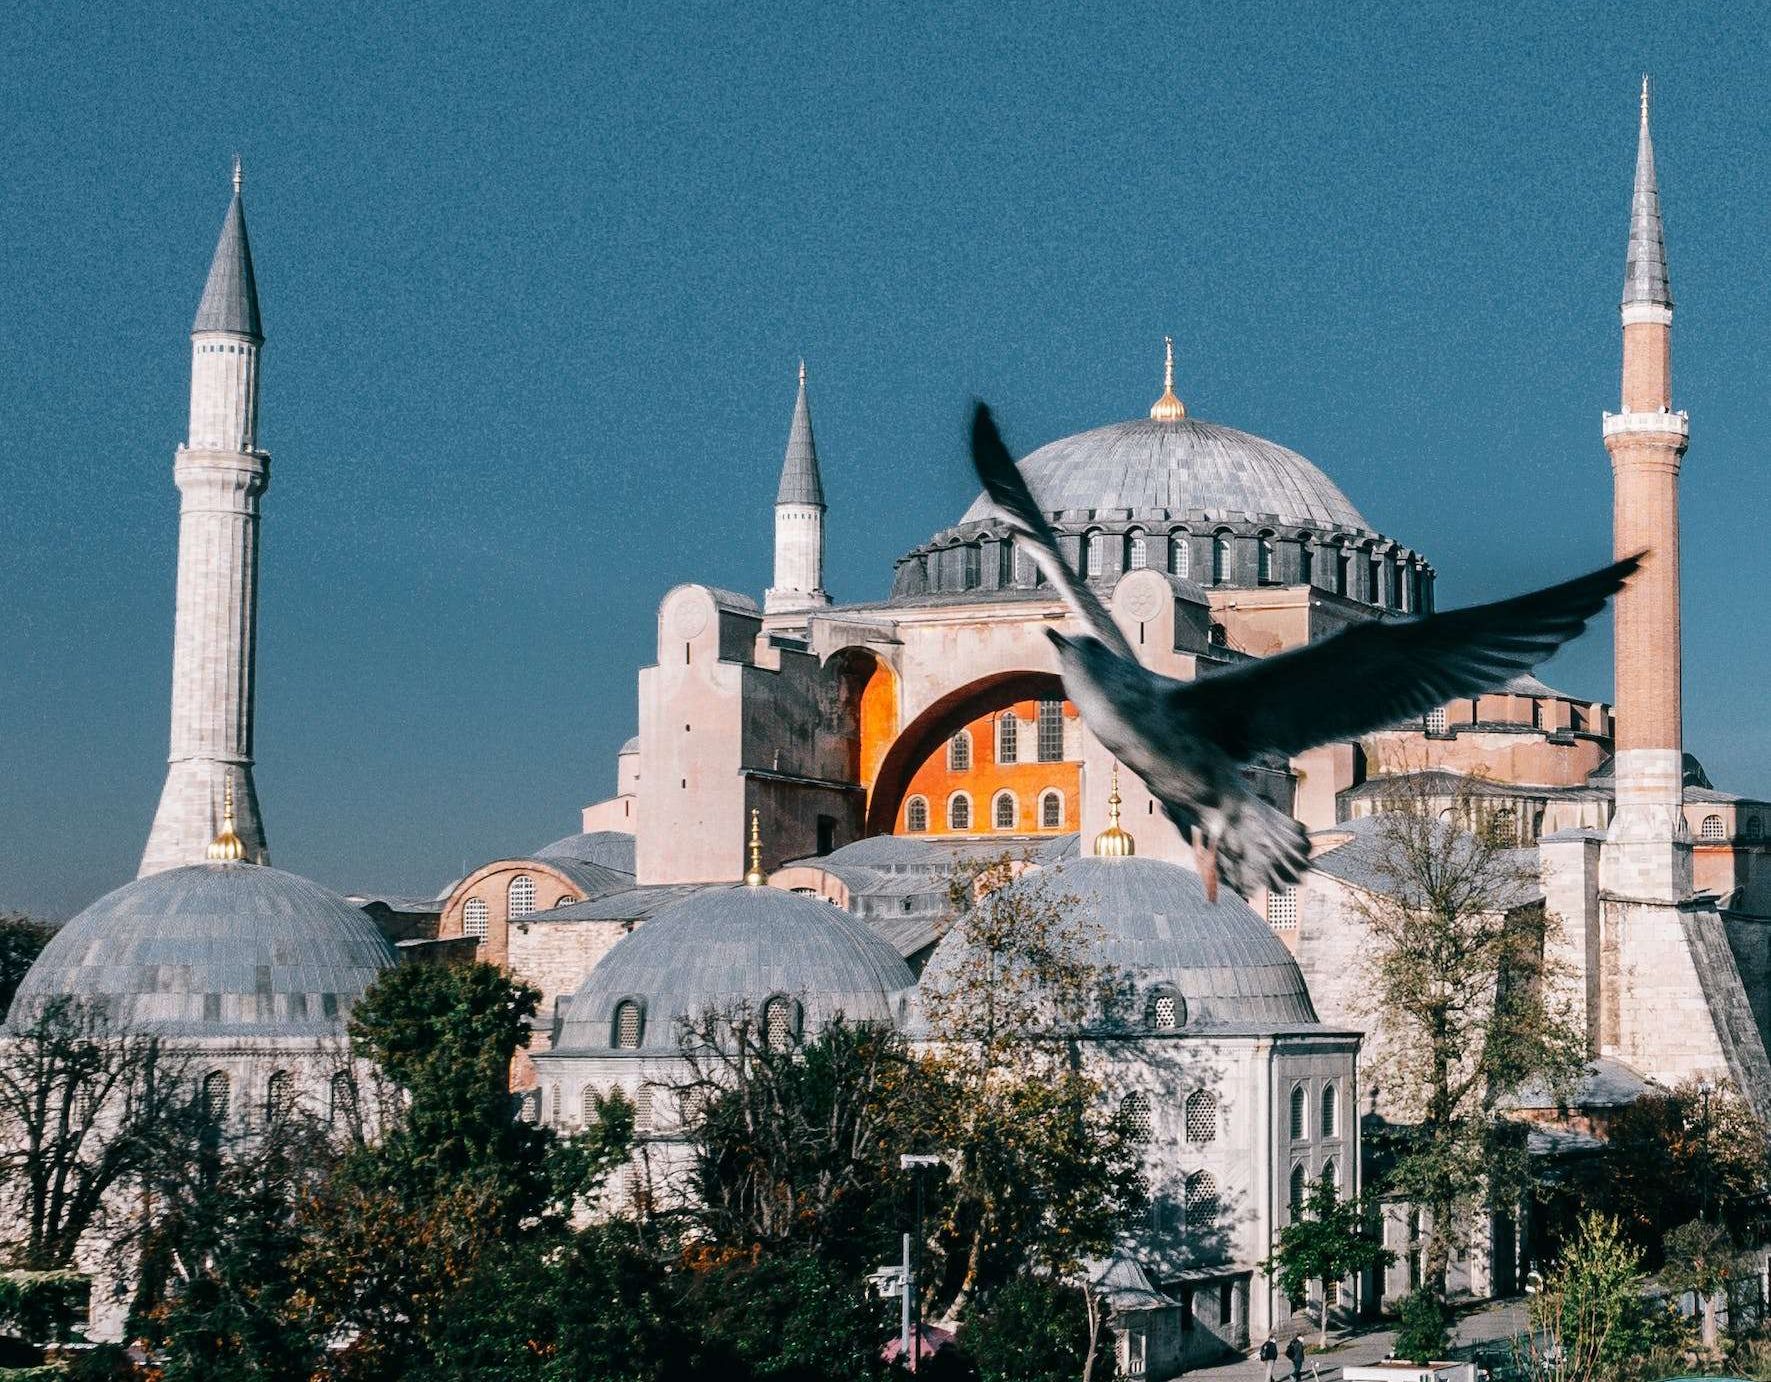 Picturesque aged Hagia Sophia cathedral with dome and minarets located in Istanbul against blue sky with flying bird in city